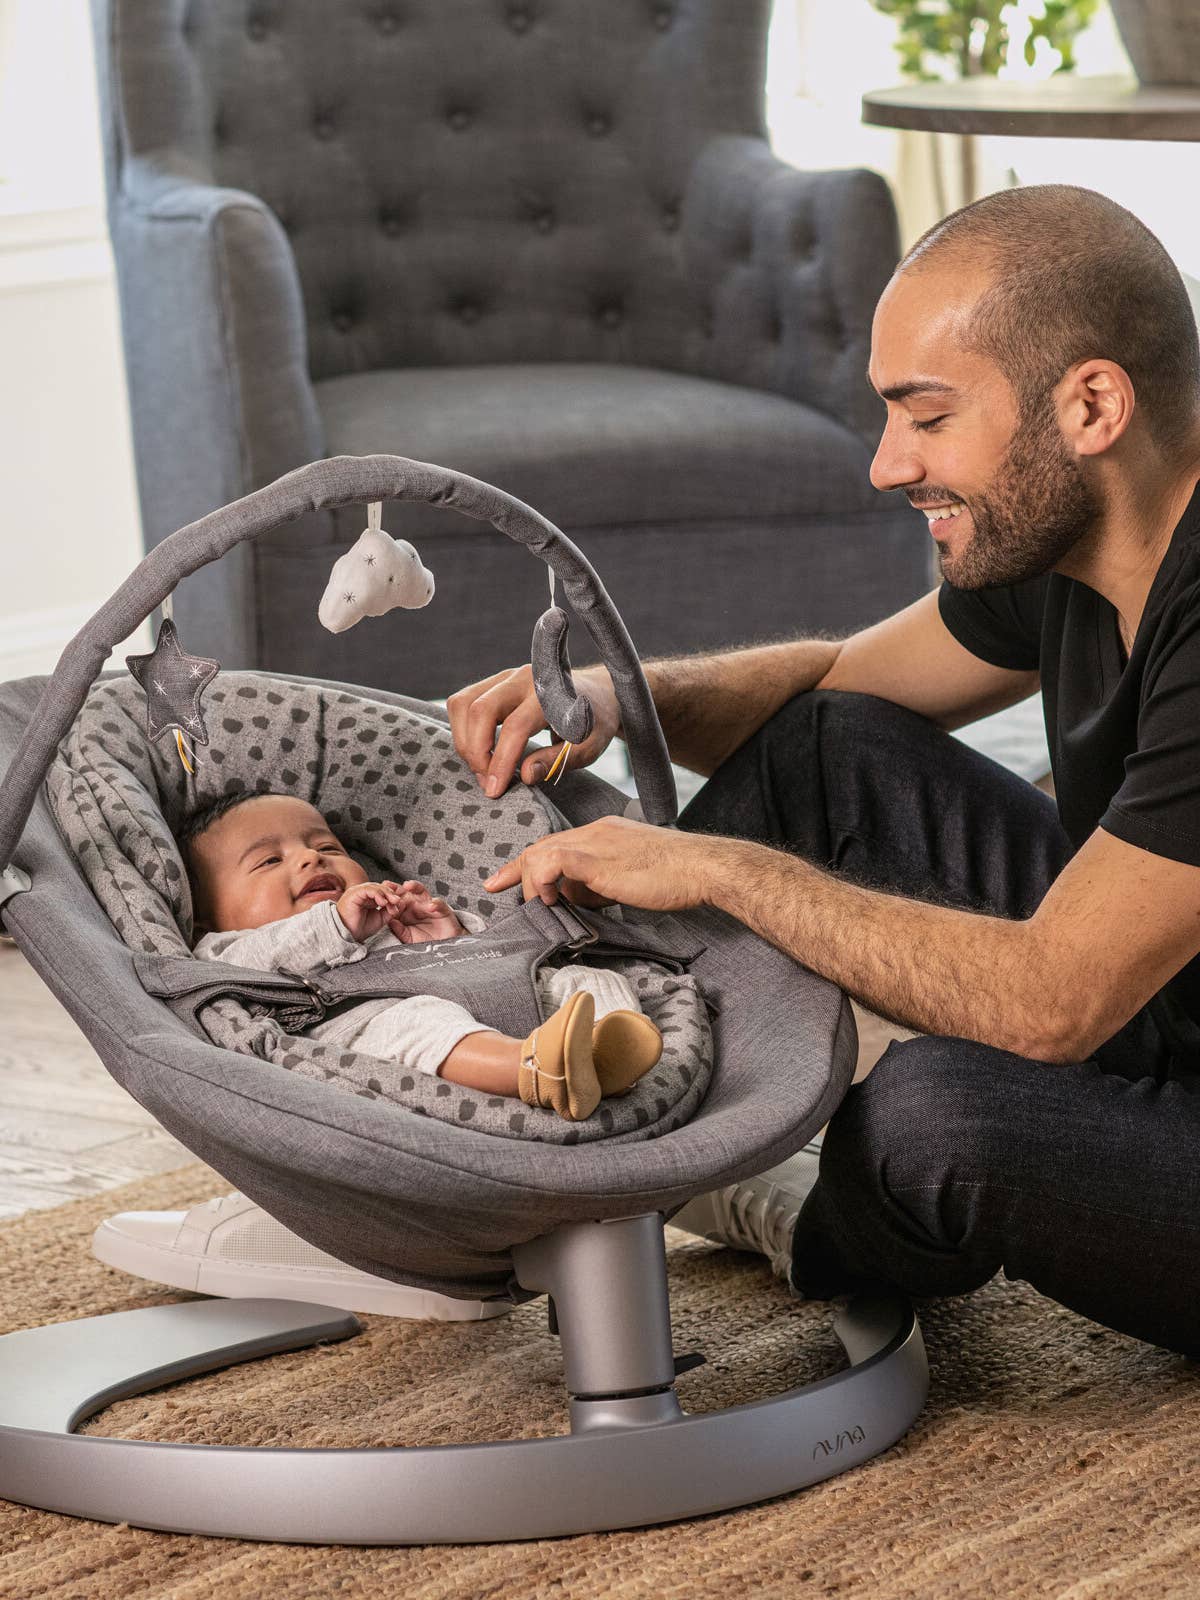 Modern Baby Gear That’s Still Highly Functional